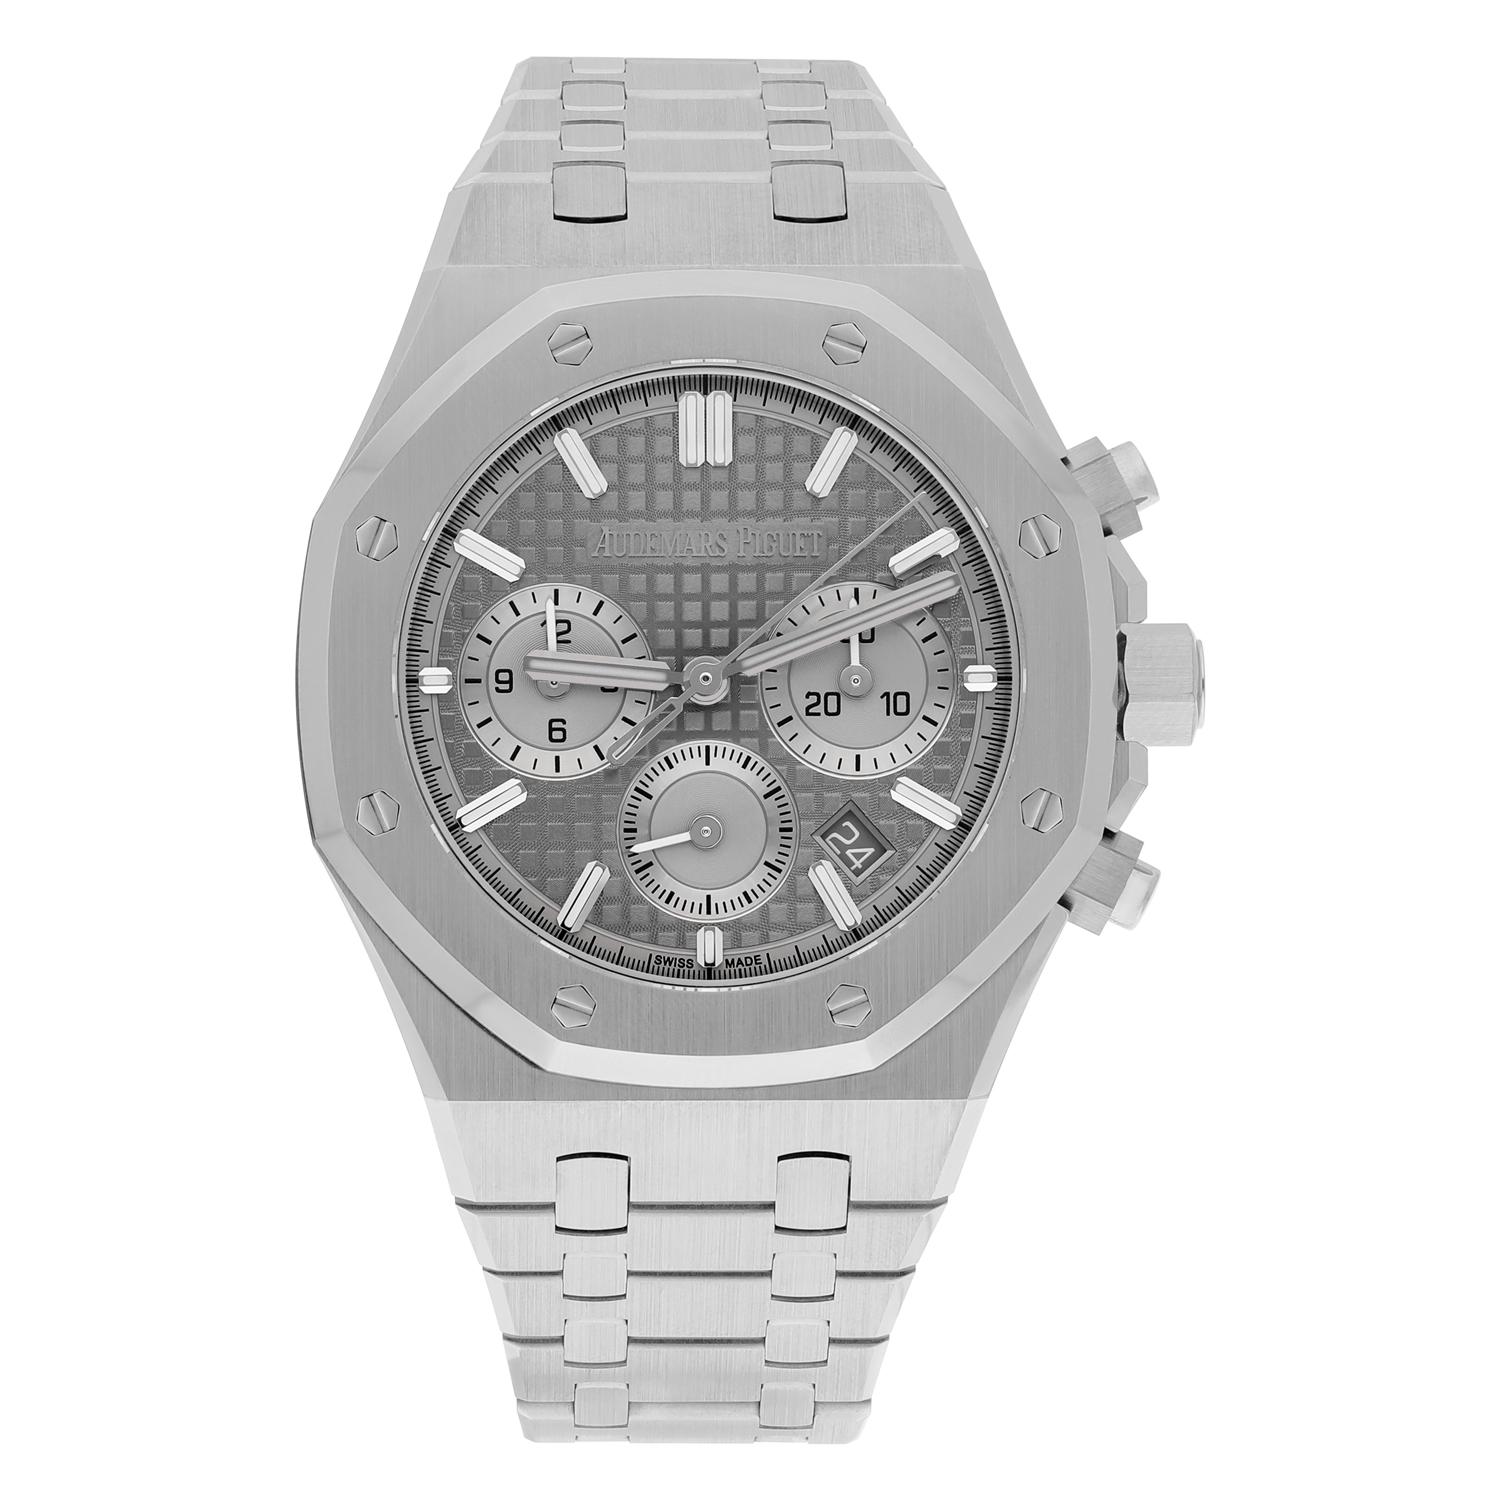 Audemars Piguet Royal Oak SELFWINDING CHRONOGRAPH 26715ST.OO.1356ST.02. 38 mm, Grey dial with “Grande Tapisserie” pattern, silver-toned counters, white gold applied hour-markers and Royal Oak hands with luminescent coating, Stainless steel case,